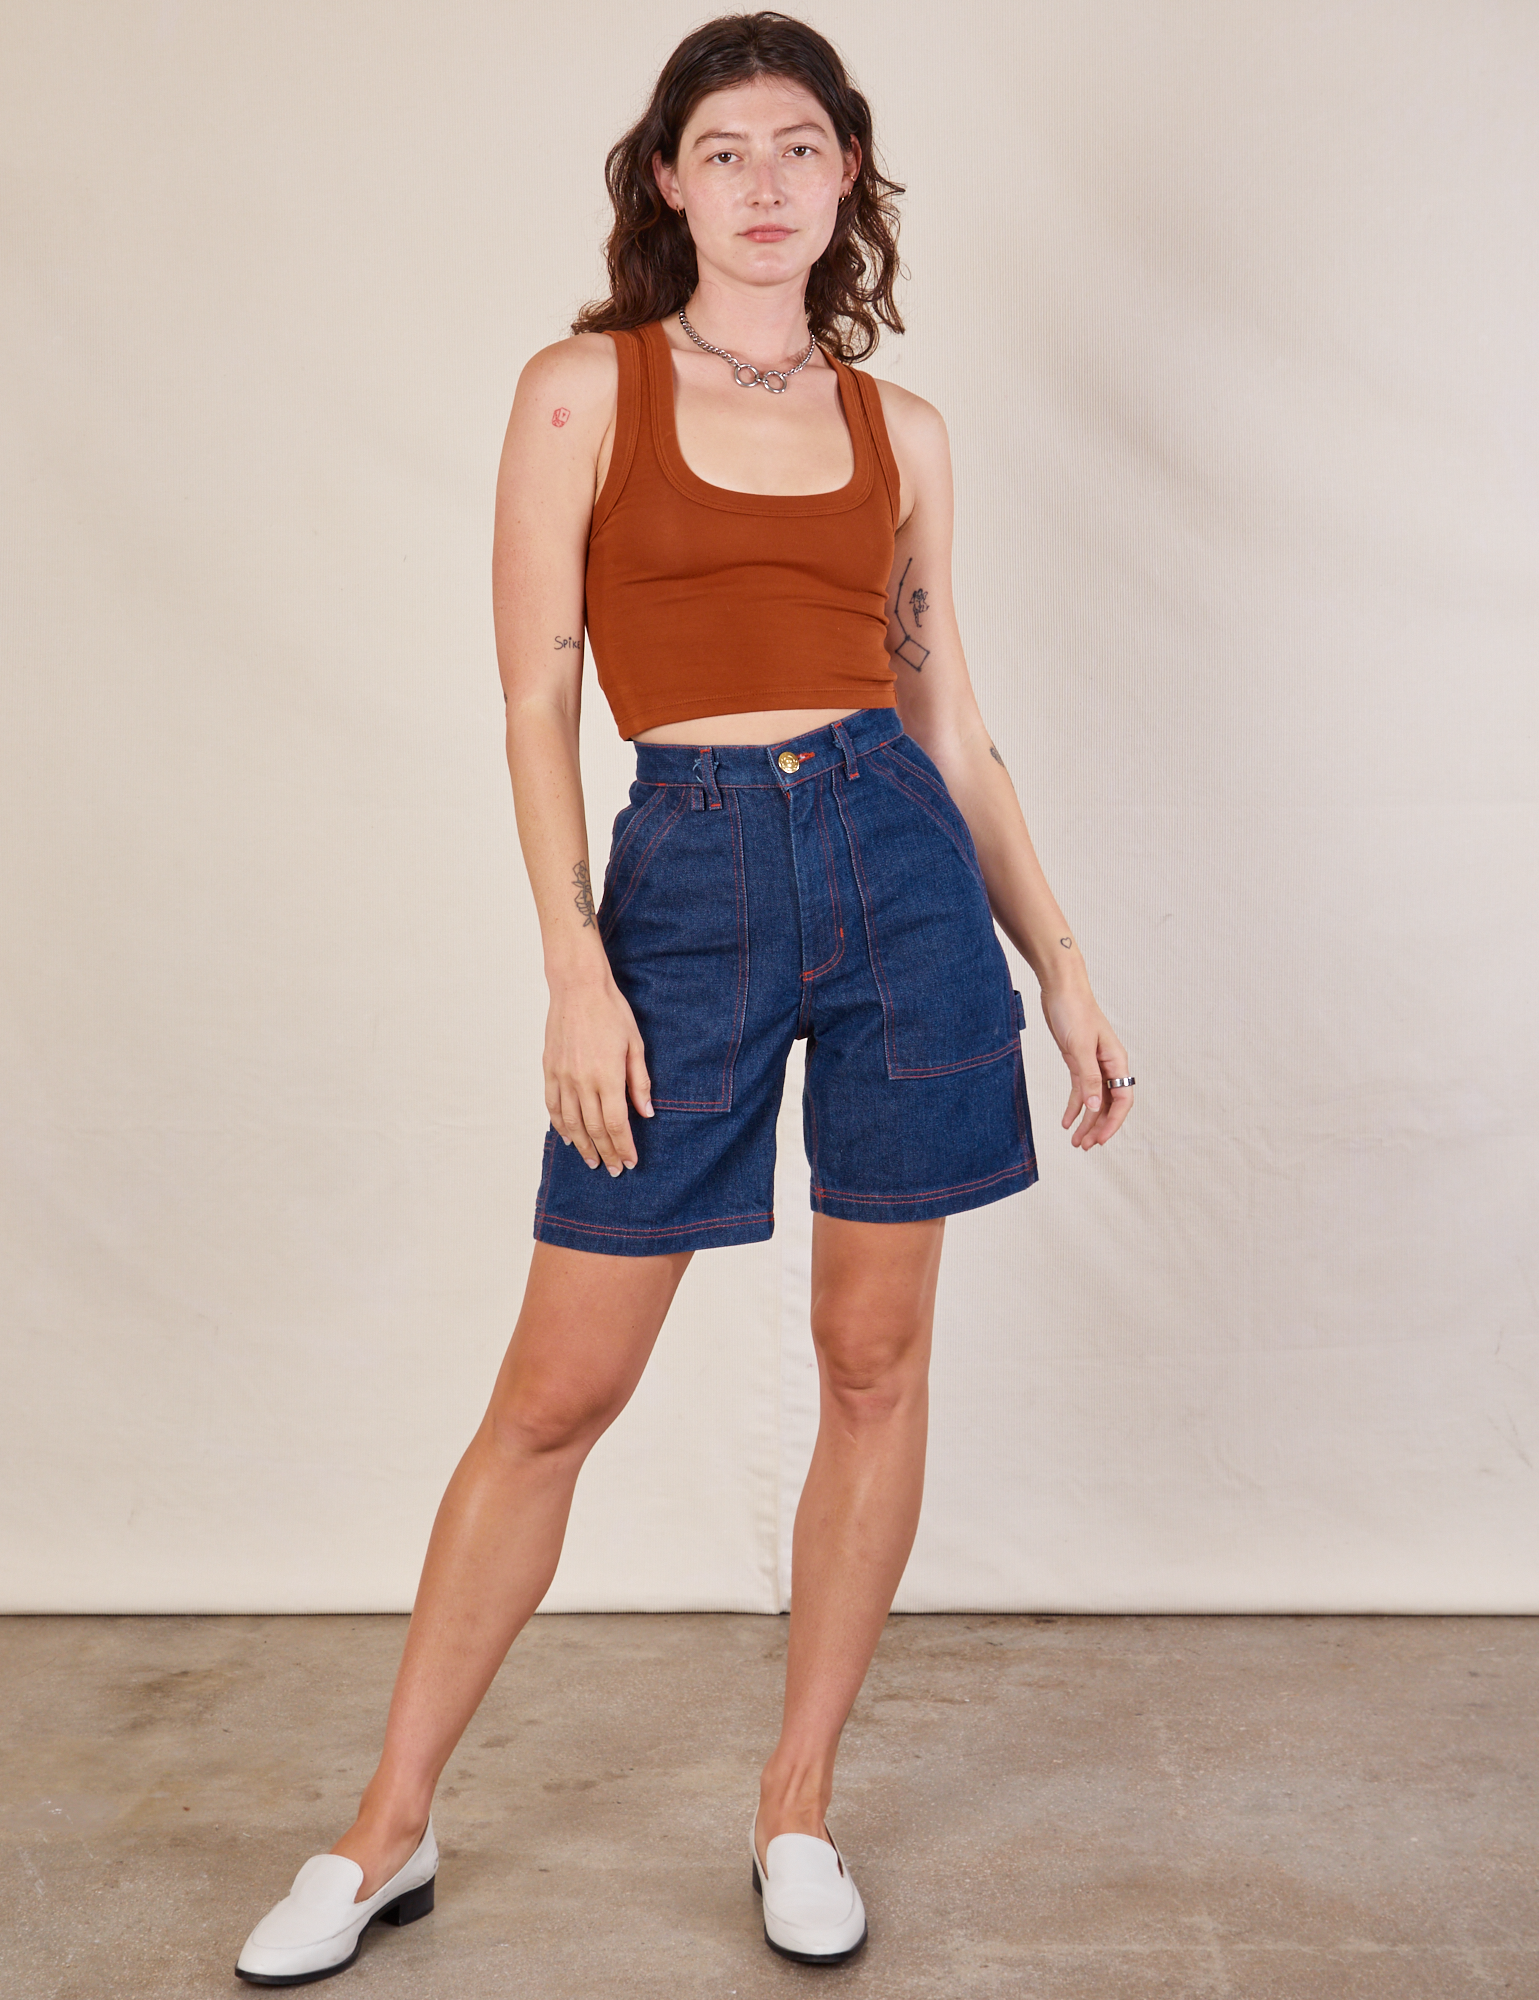 Alex is 5'8" and wearing XXS Carpenter Shorts in Dark Wash paired with burnt terracotta Cropped Tank